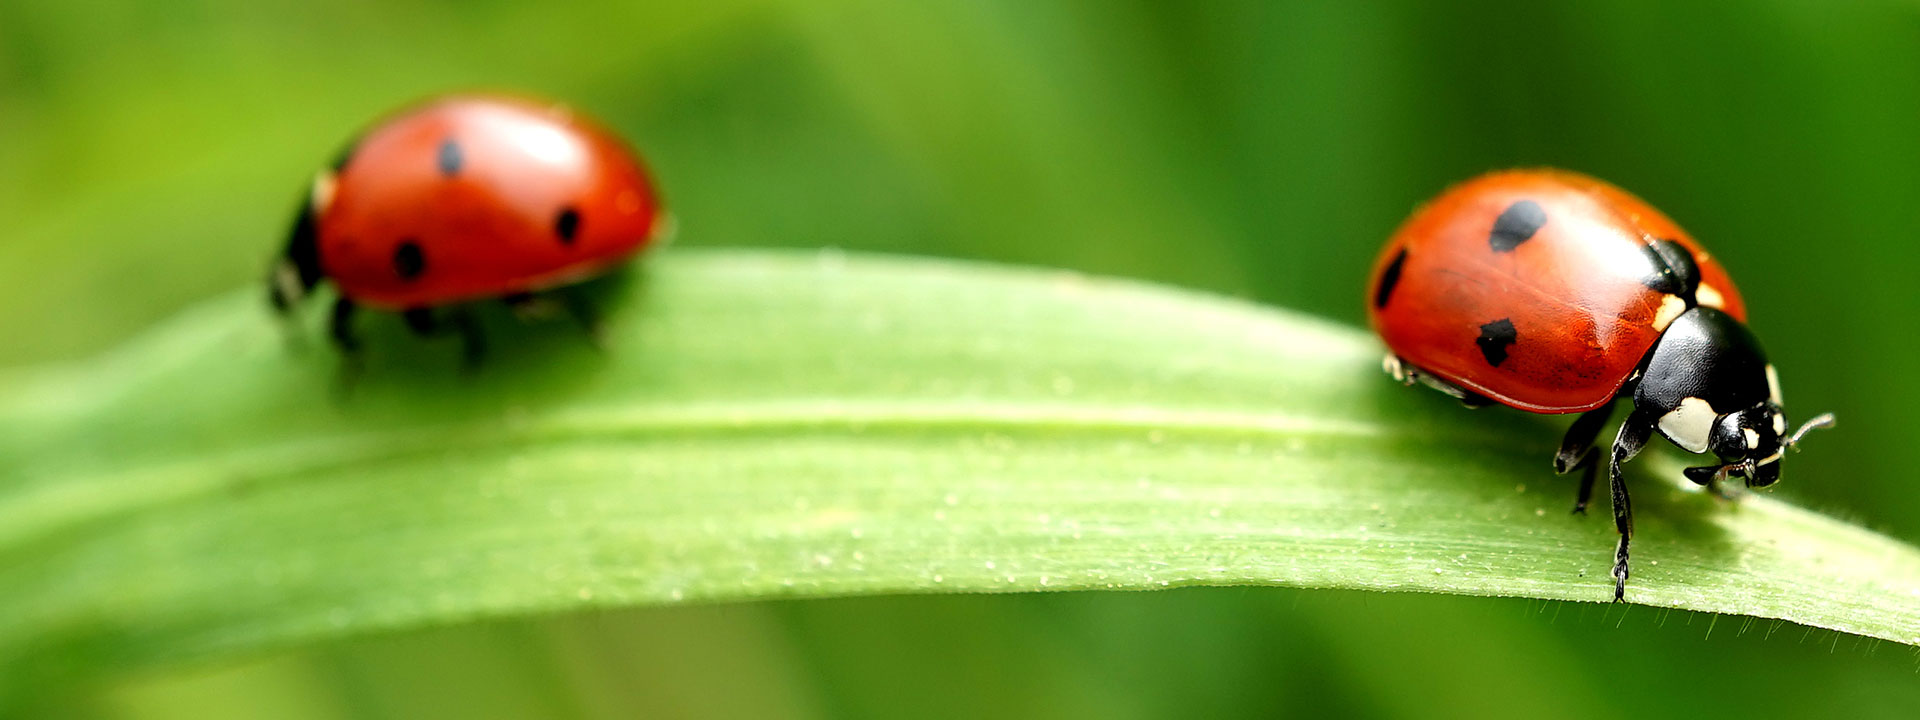 Closeup of two red Ladybugs on a blade of grass.